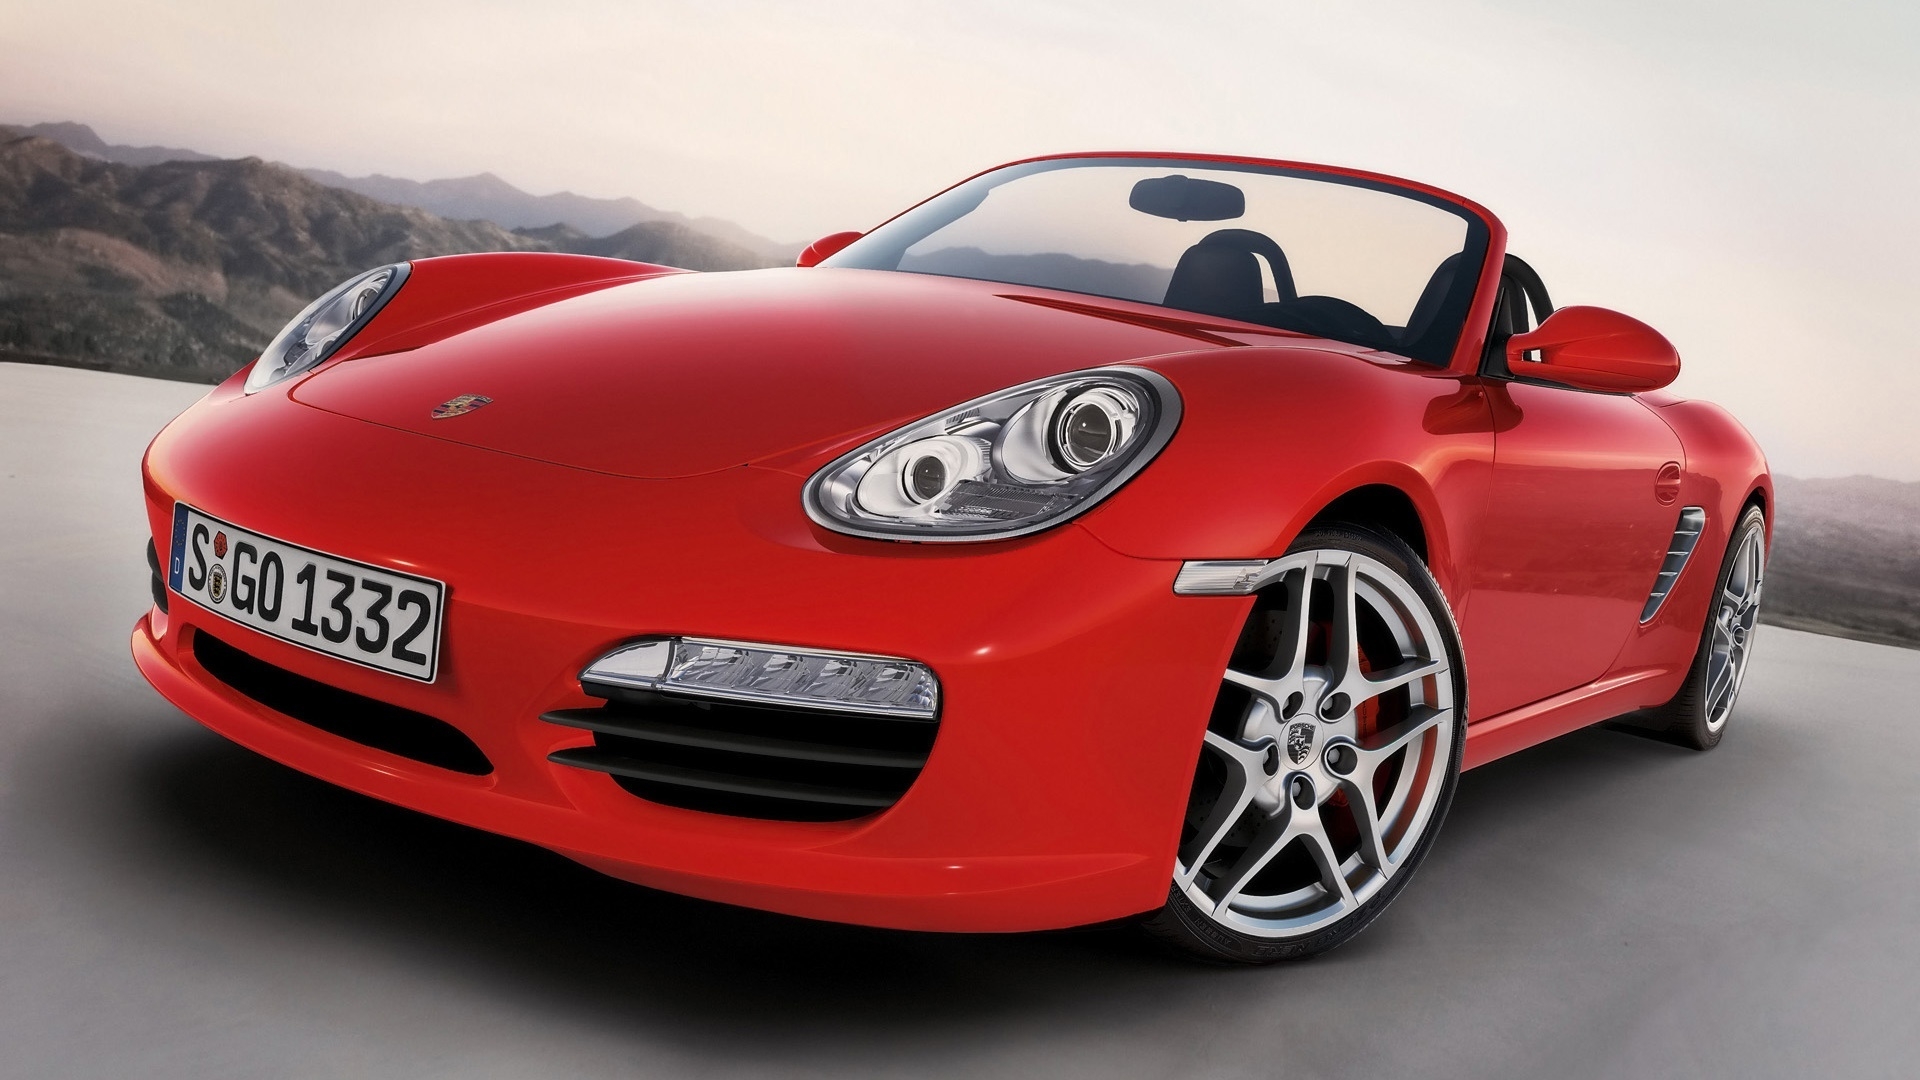 Porsche Boxster S 2009 Red for 1920 x 1080 HDTV 1080p resolution